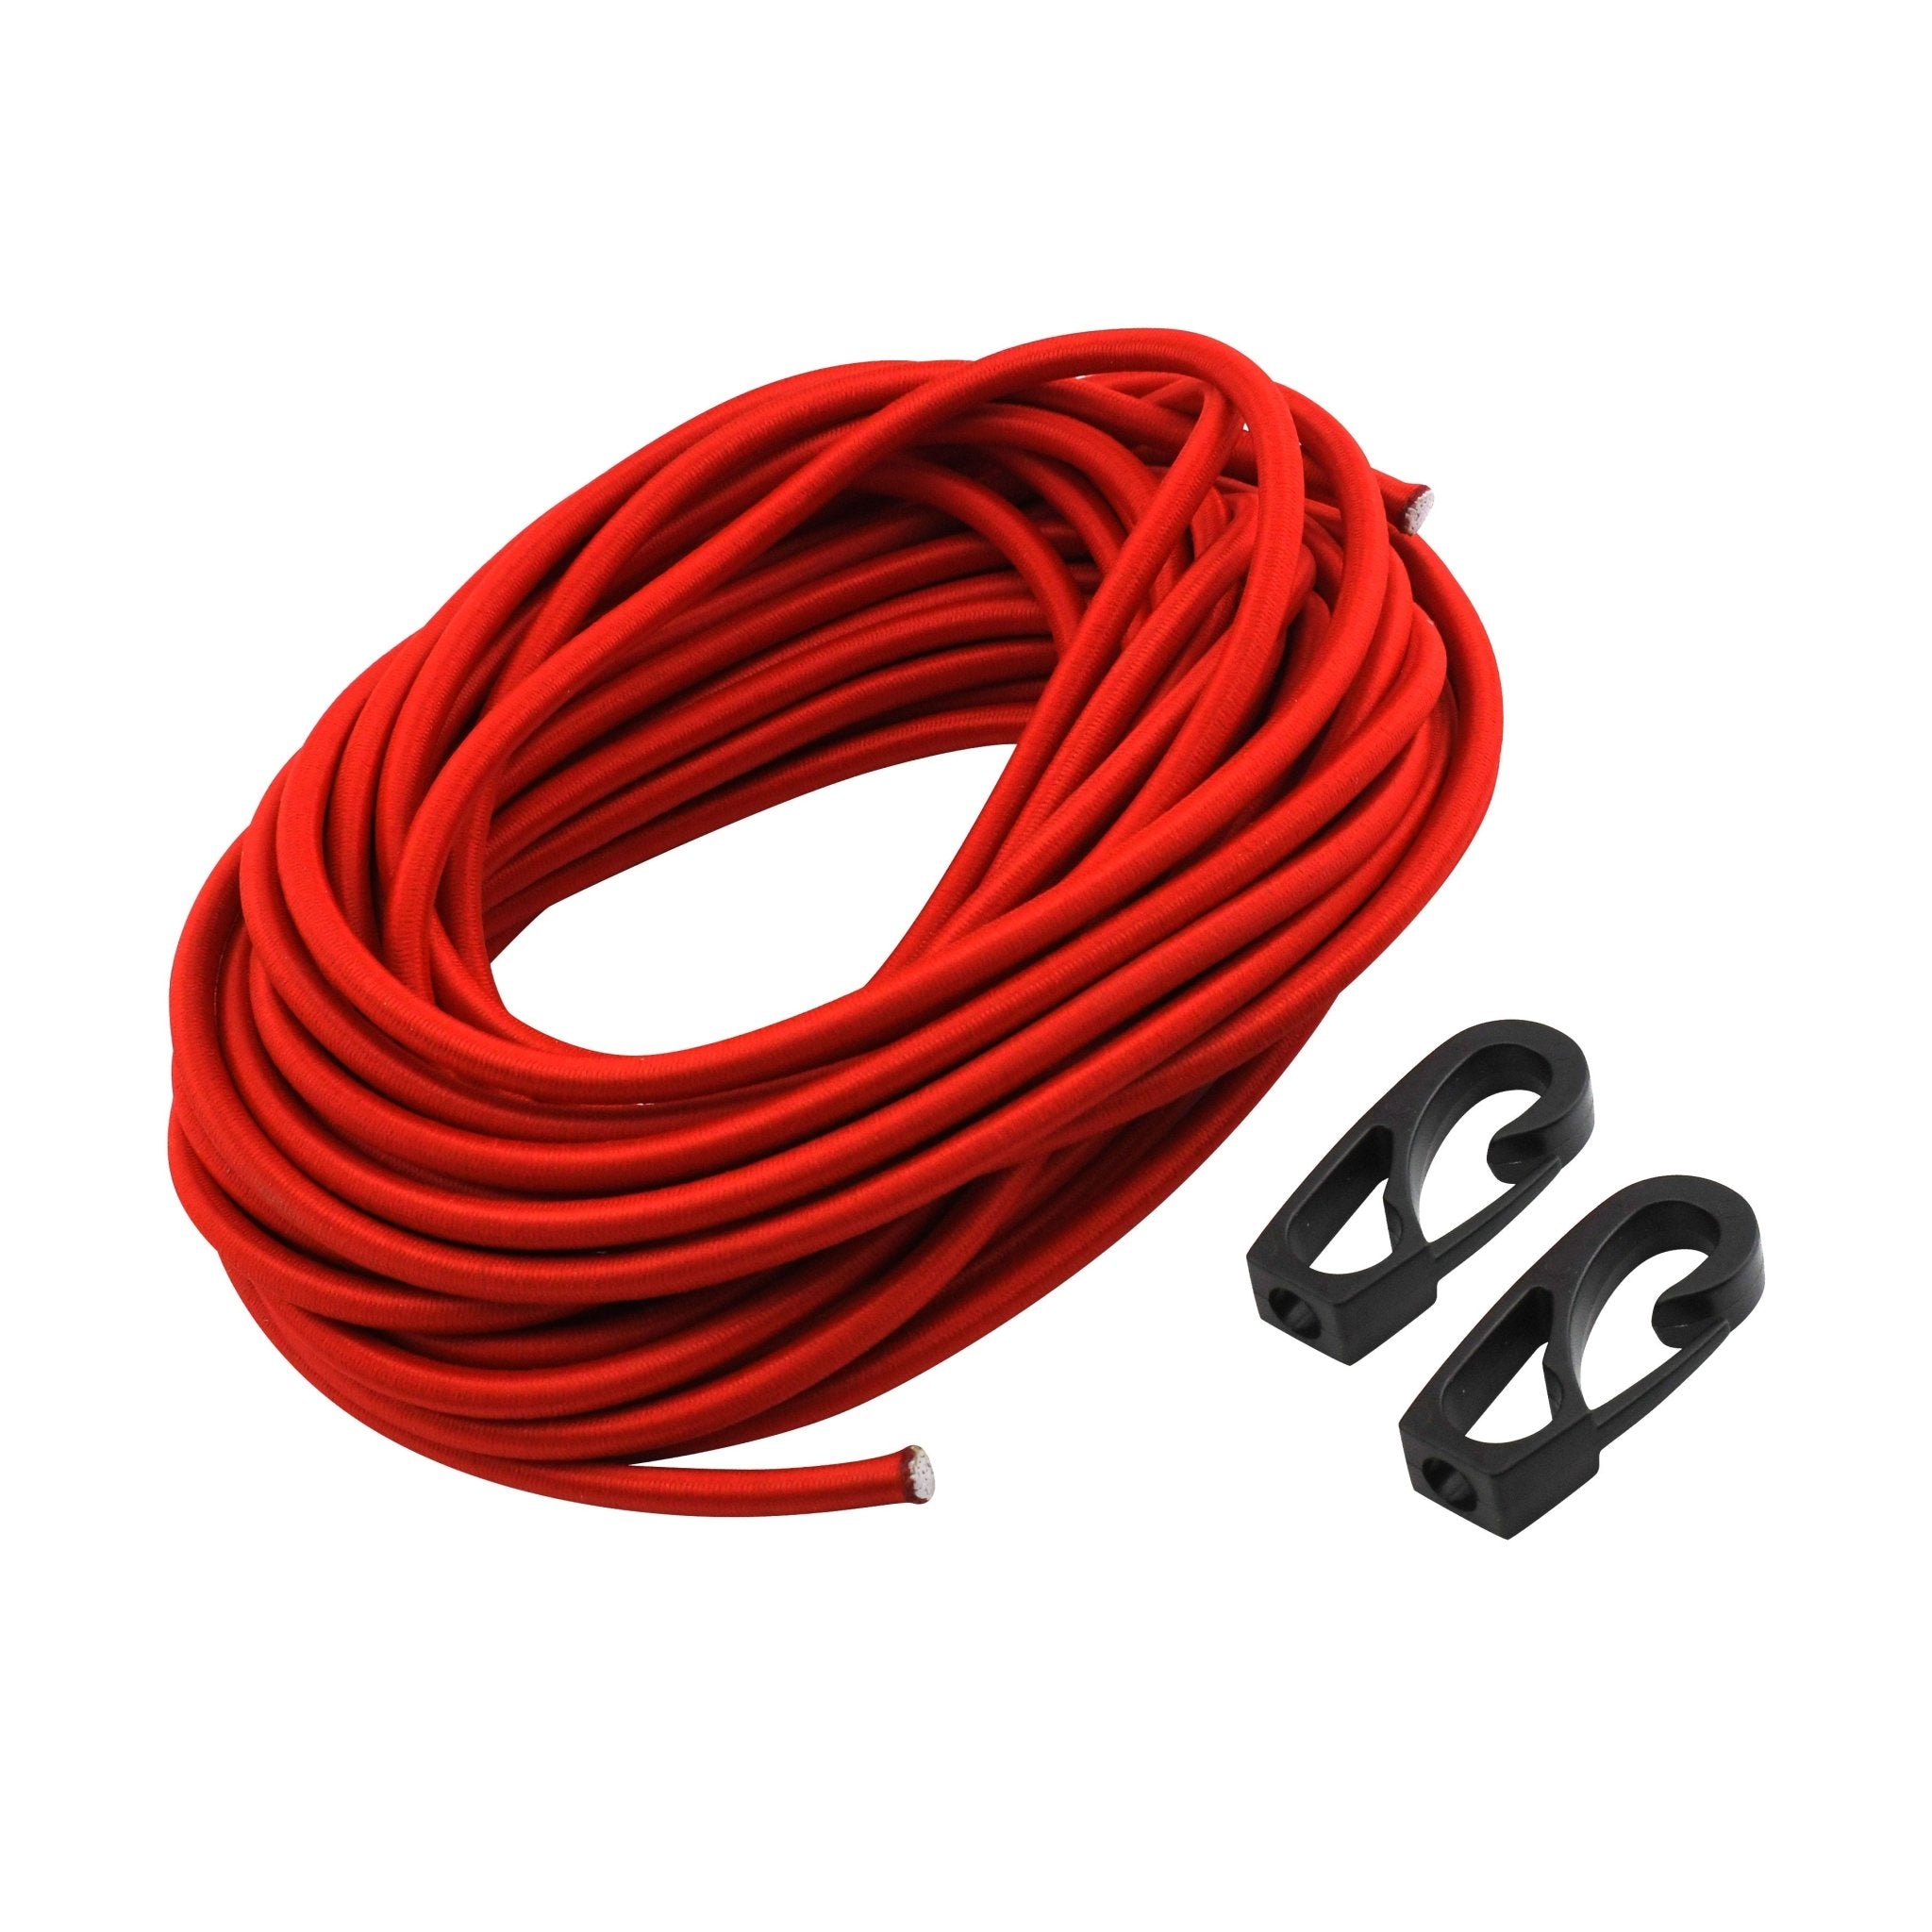 Bungee Cord with S Hooks - 30' - Vibe Kayaks